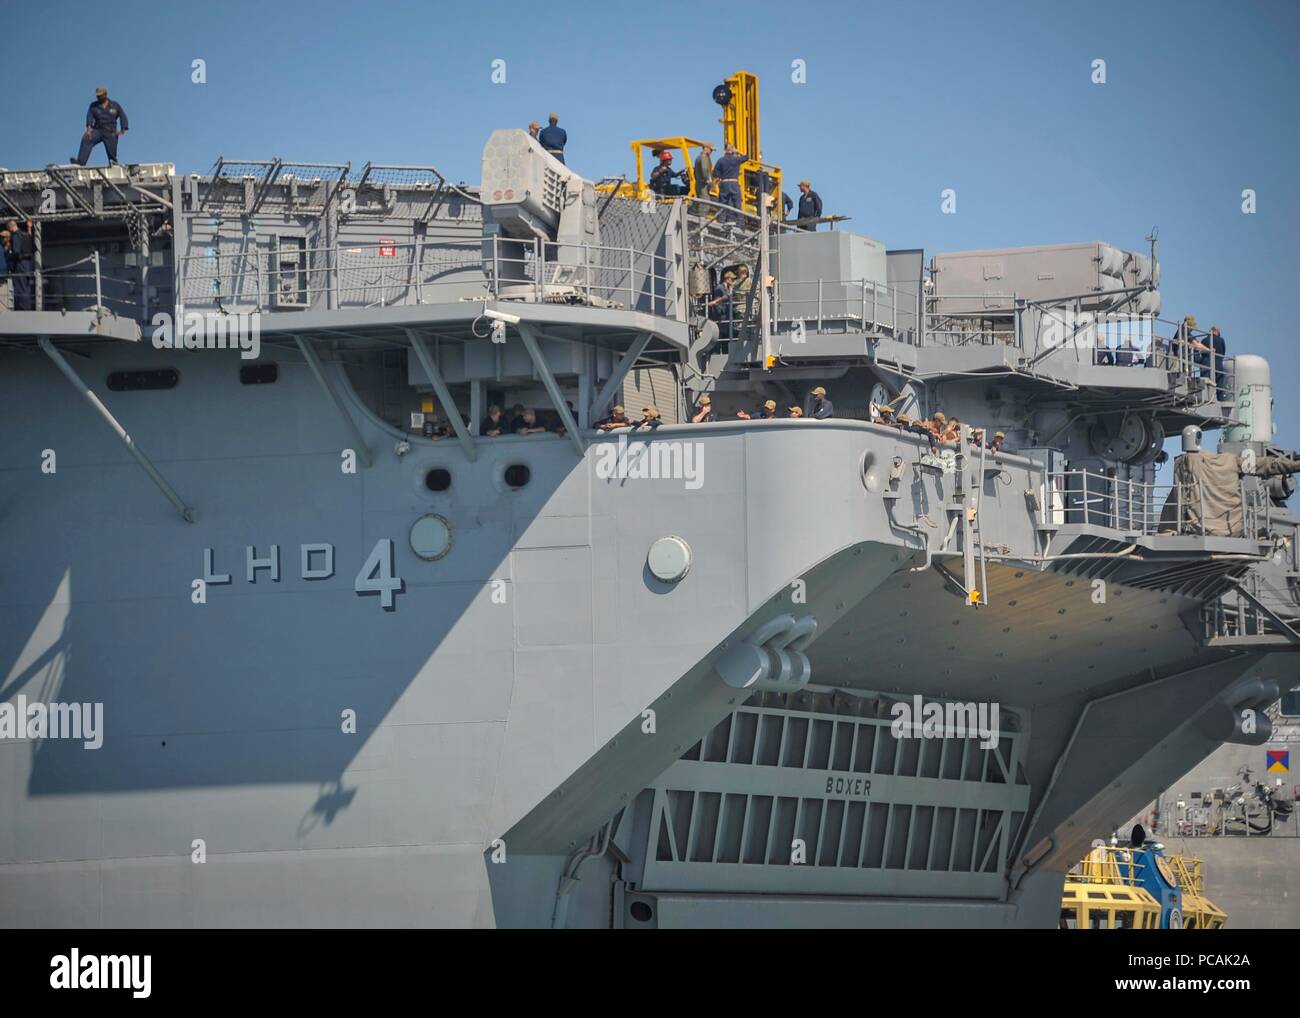 SAN DIEGO (Jul. 31, 2018) Sailors, assigned to amphibious assault ship USS Boxer (LHD 4), stand-by as the ship is being prepared to get underway. Boxer is underway conducting routine operations off the coast of Southern California. (U.S. Navy Photo by Mass Communication Specialist 2nd Class Jesse Monford/RELEASED) Stock Photo